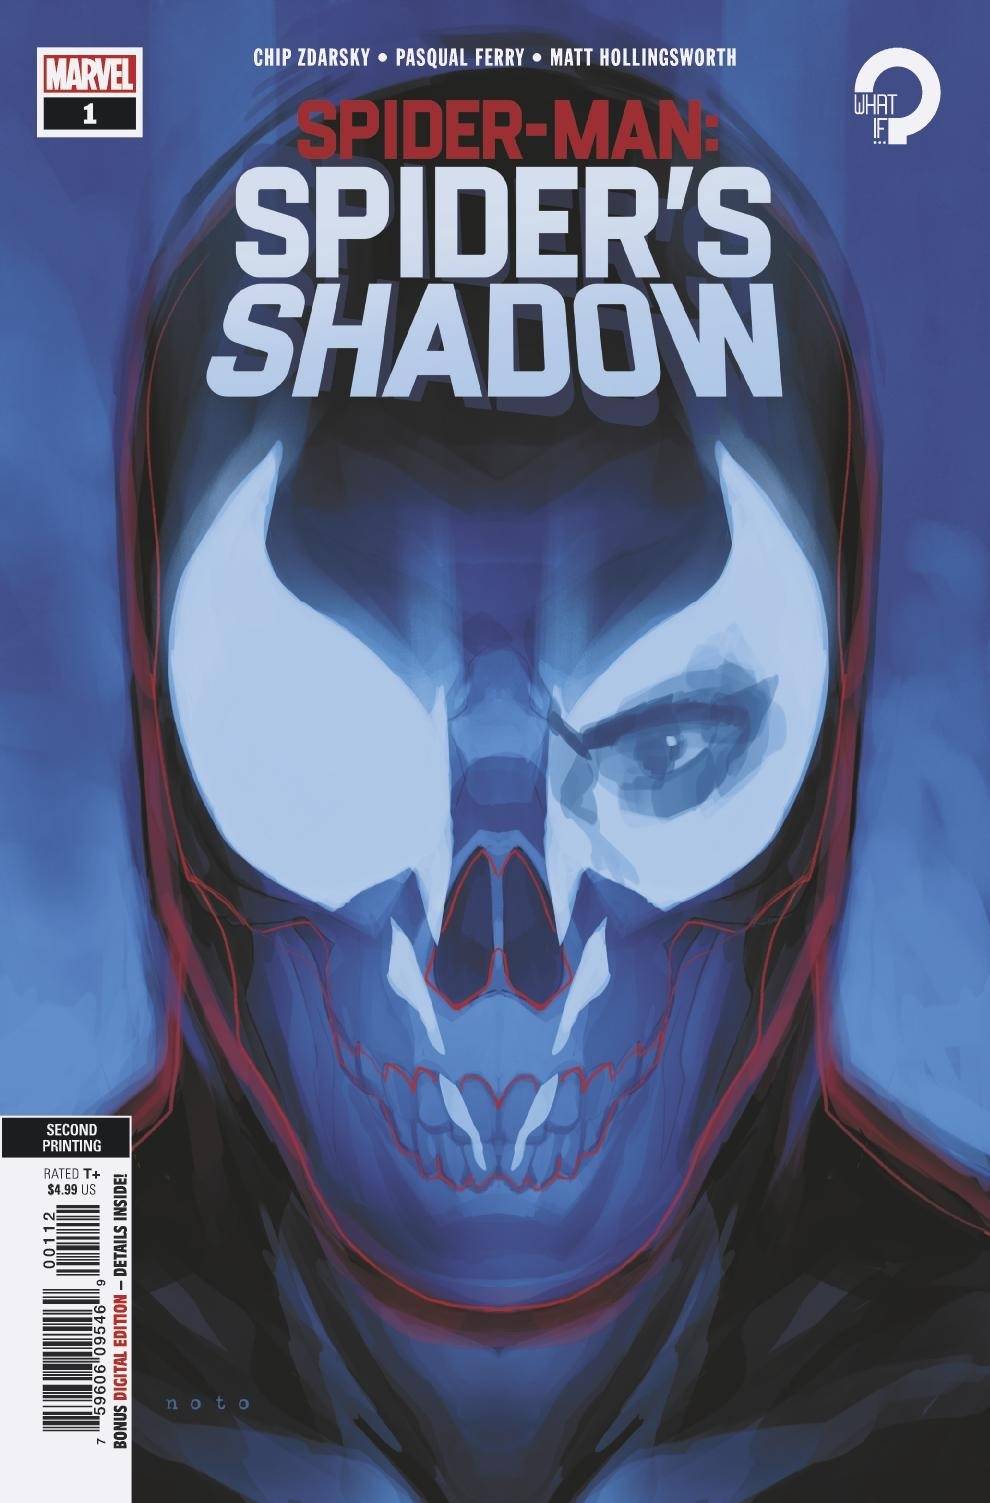 Spider-Man Spiders Shadow #1 2nd Printing Variant (Of 5)